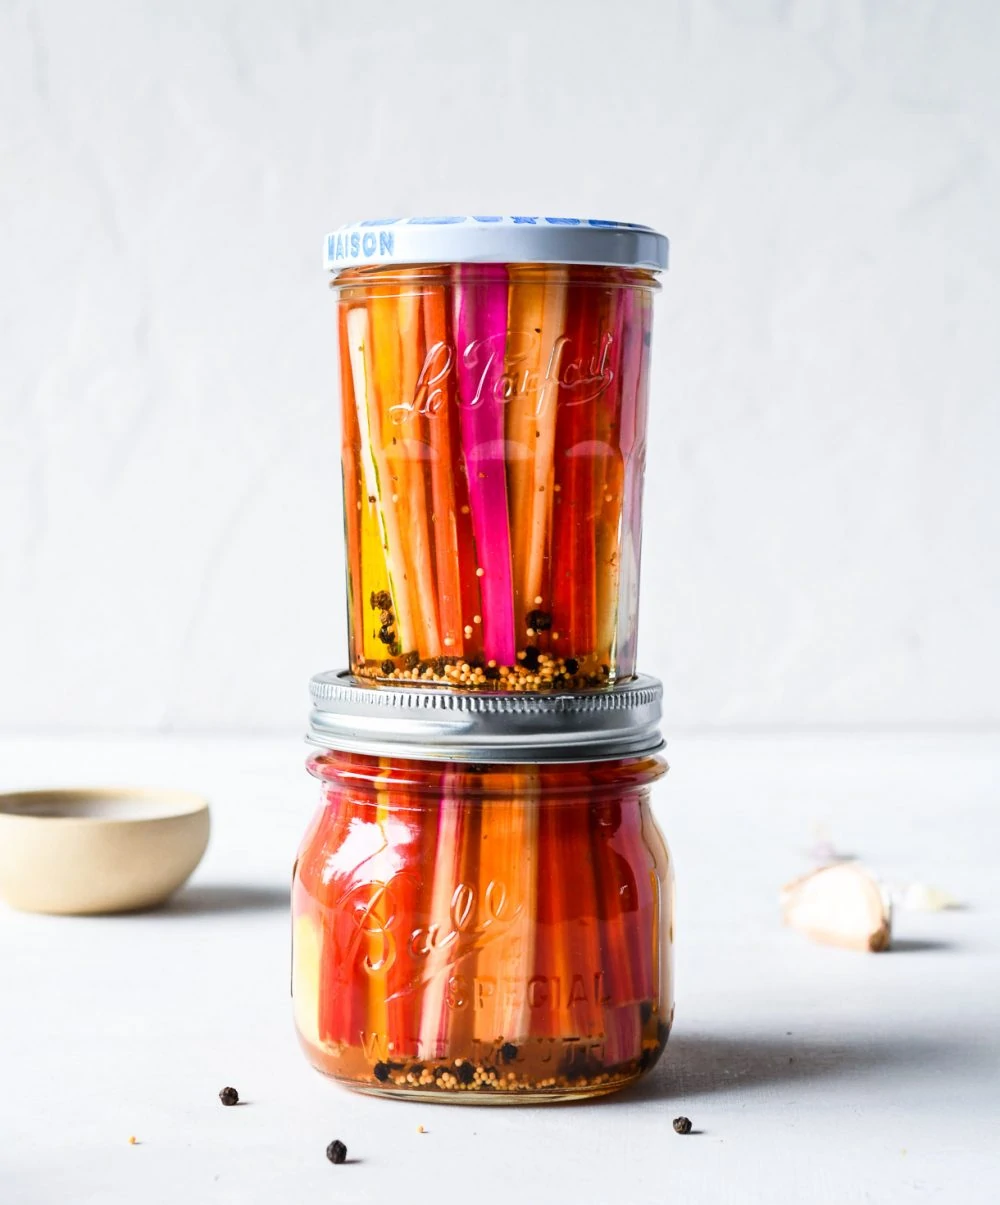 pickled chard stems in two glass jars with lids, stacked on top of each other